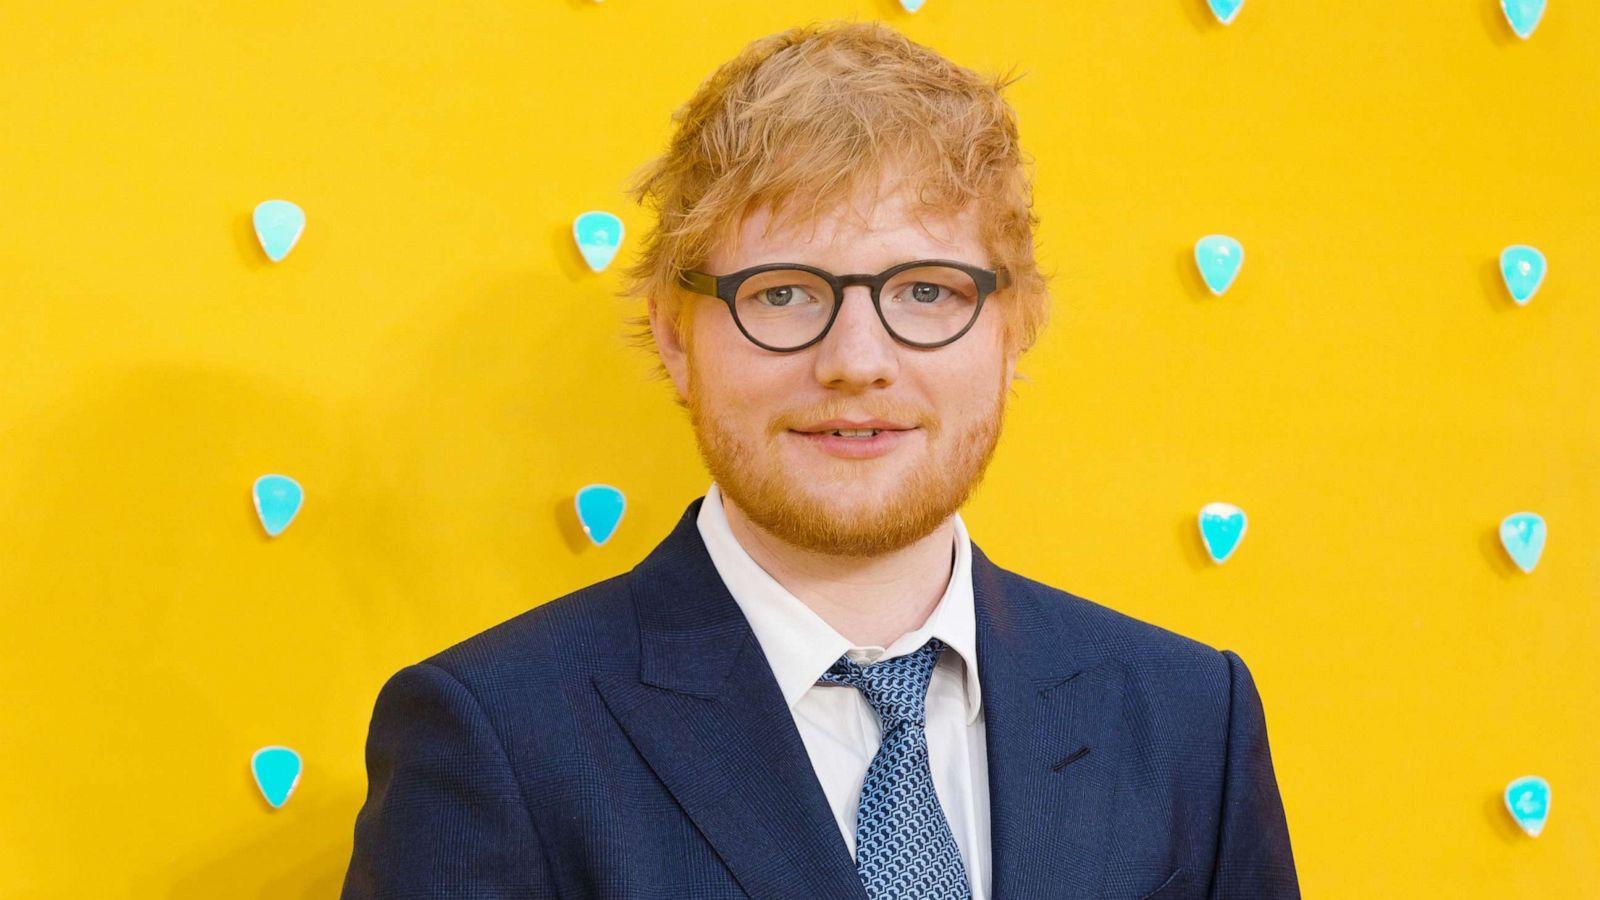 Ed Sheeran drops new album featuring collaborations with Bieber